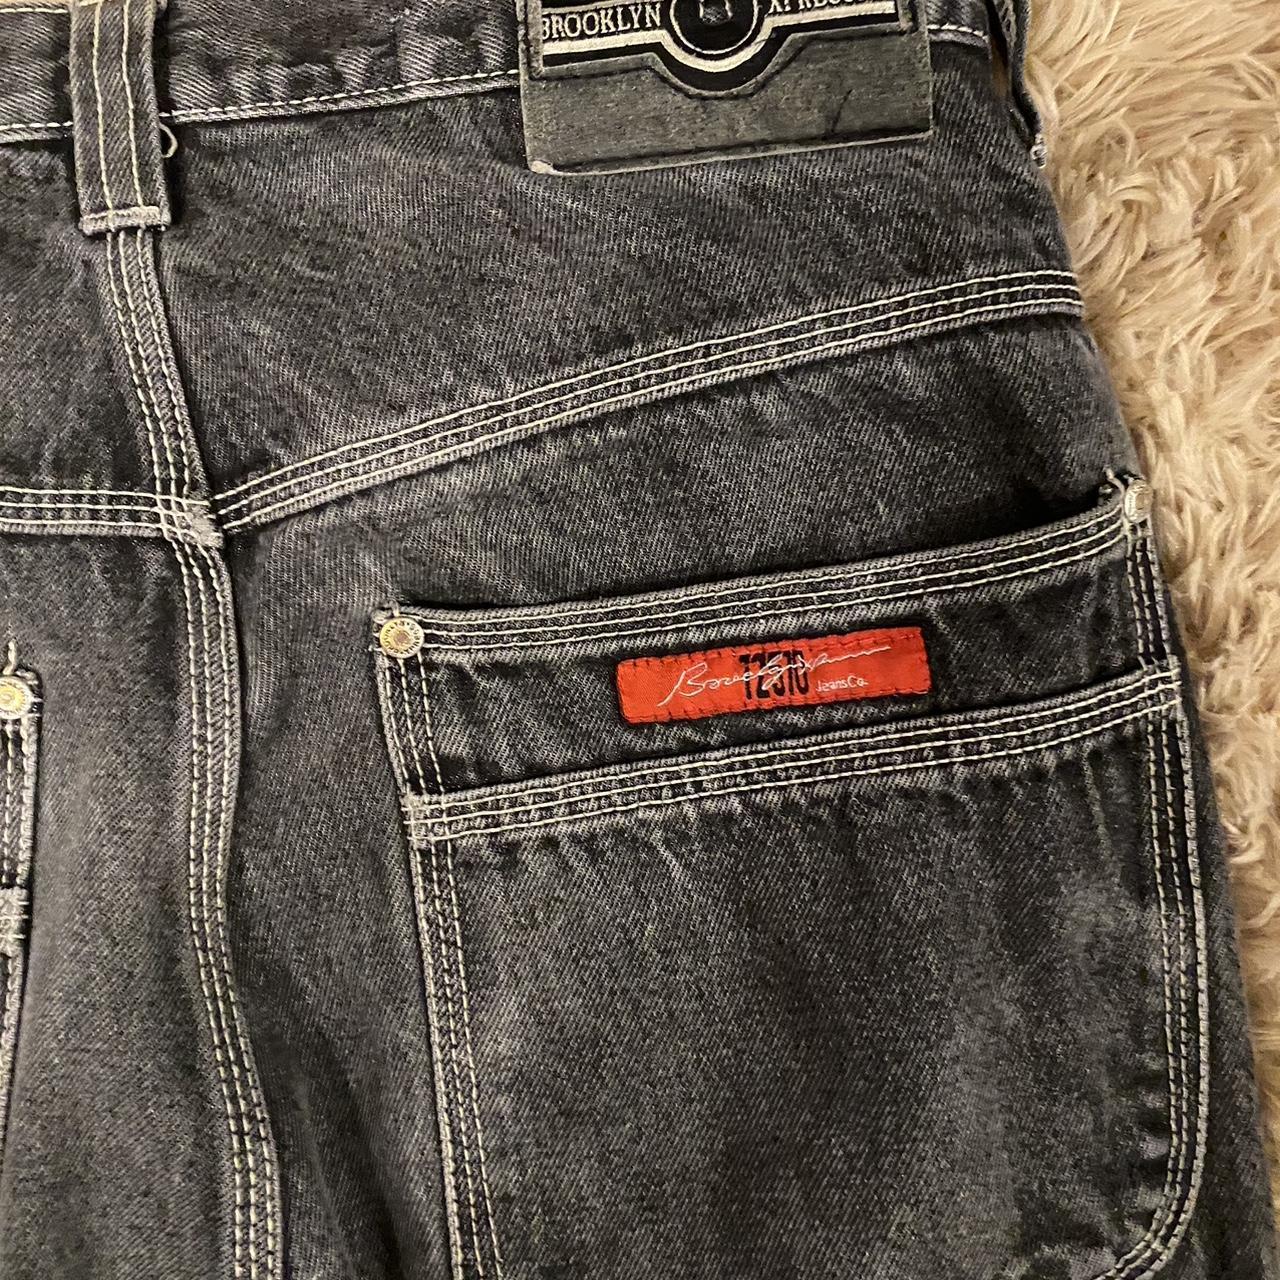 Brooklyn Express Baggy jeans Nice grey wash with... - Depop